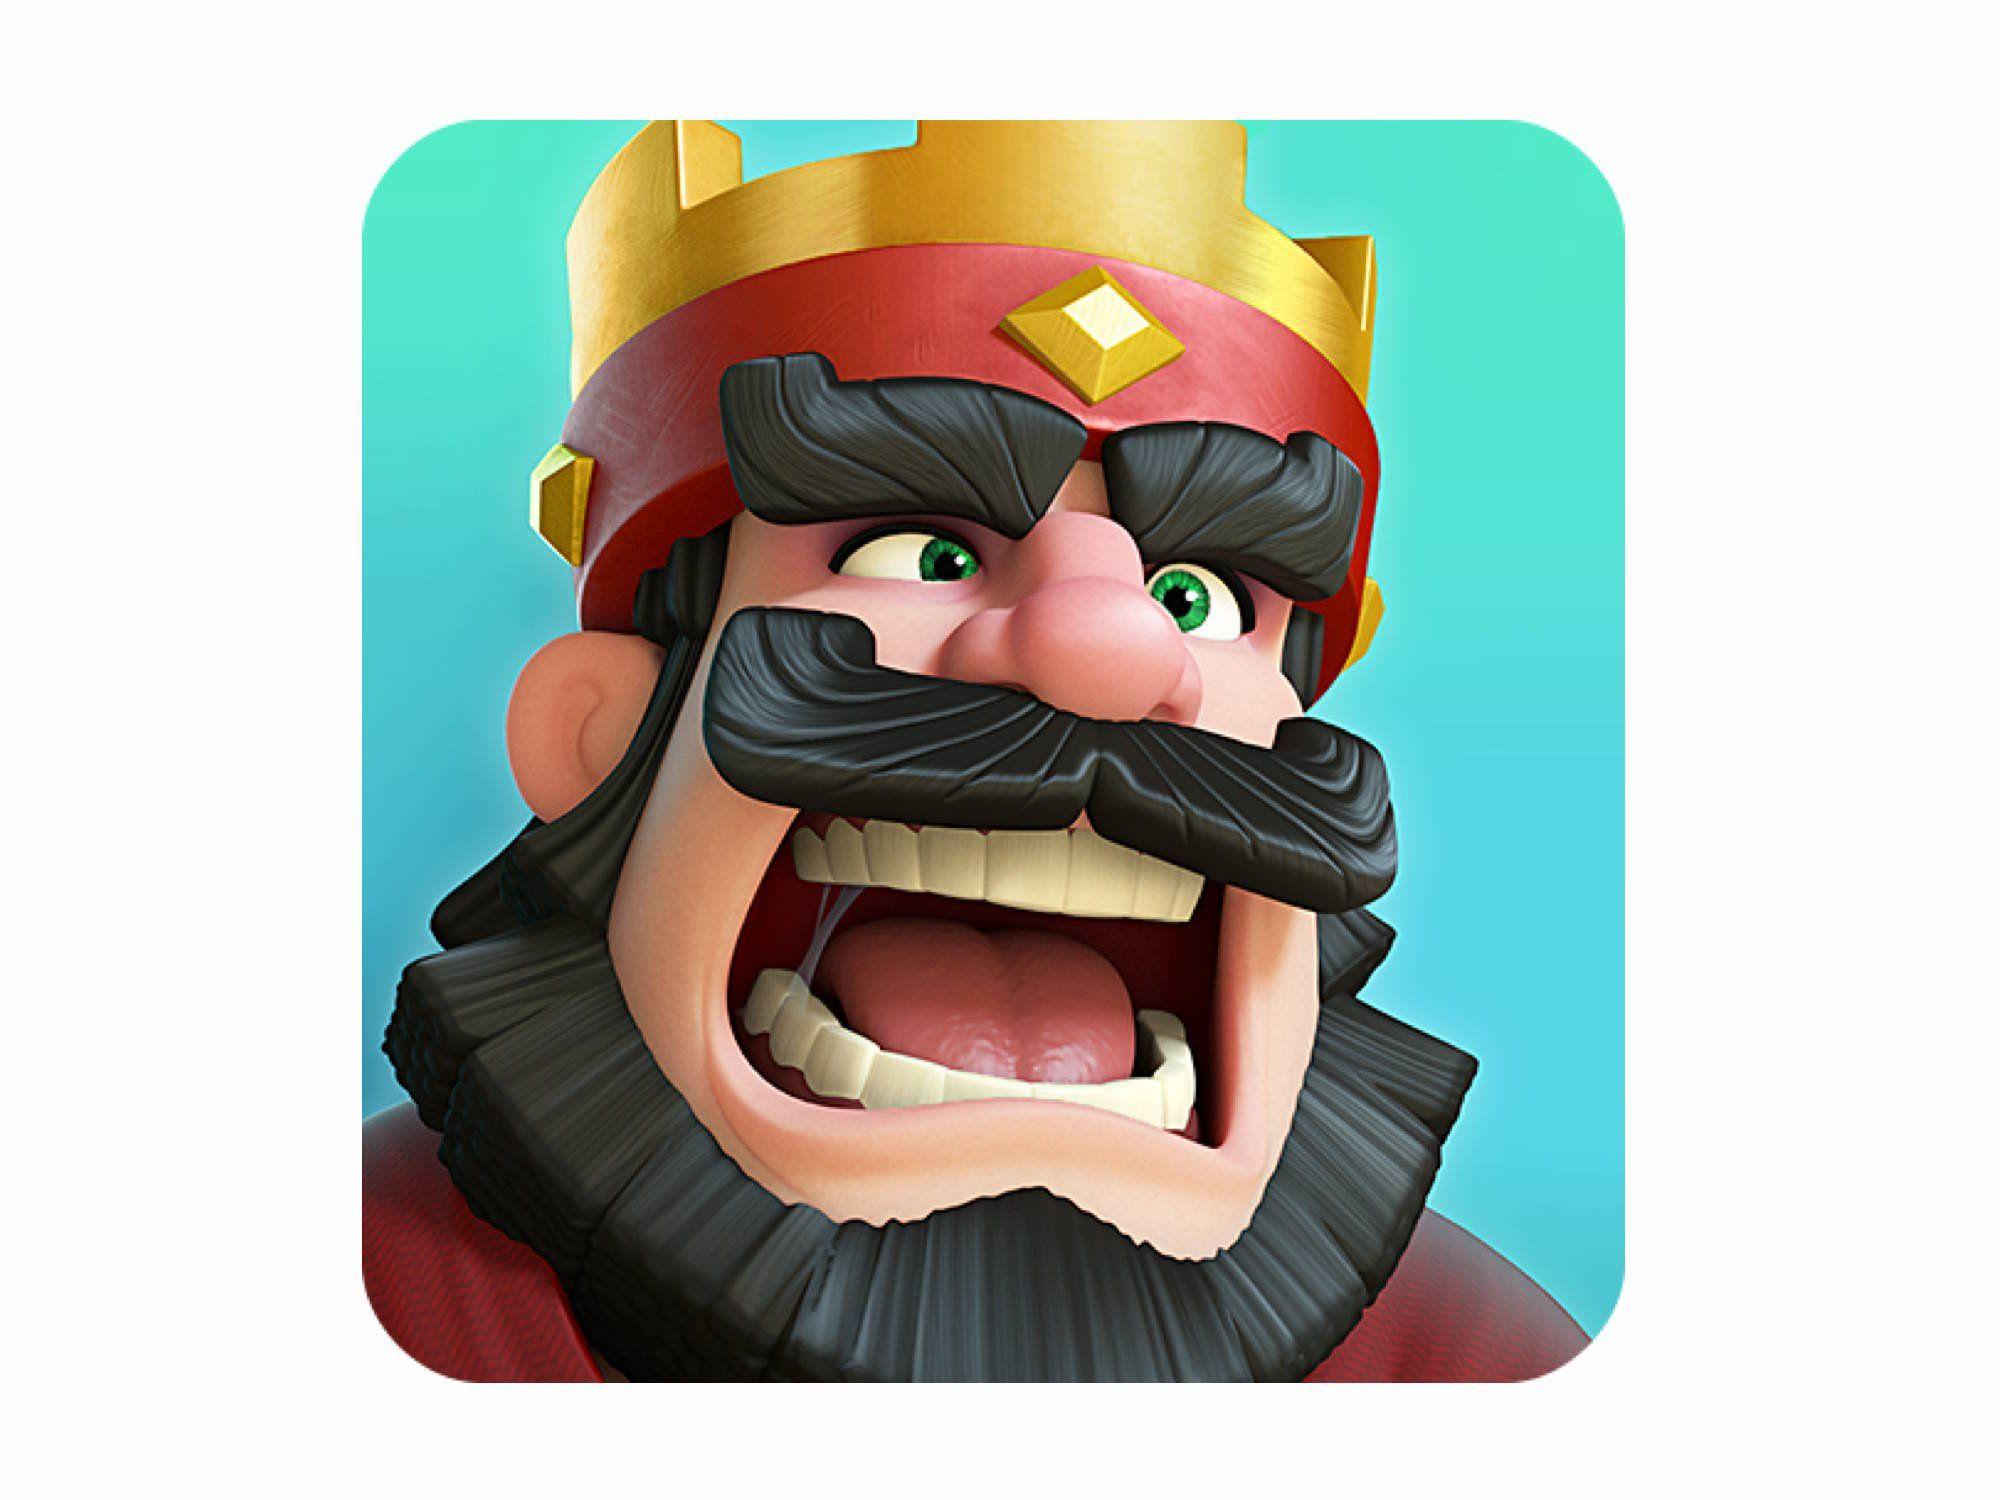 Clash Royale tips and tricks: strategies and tactics to help you